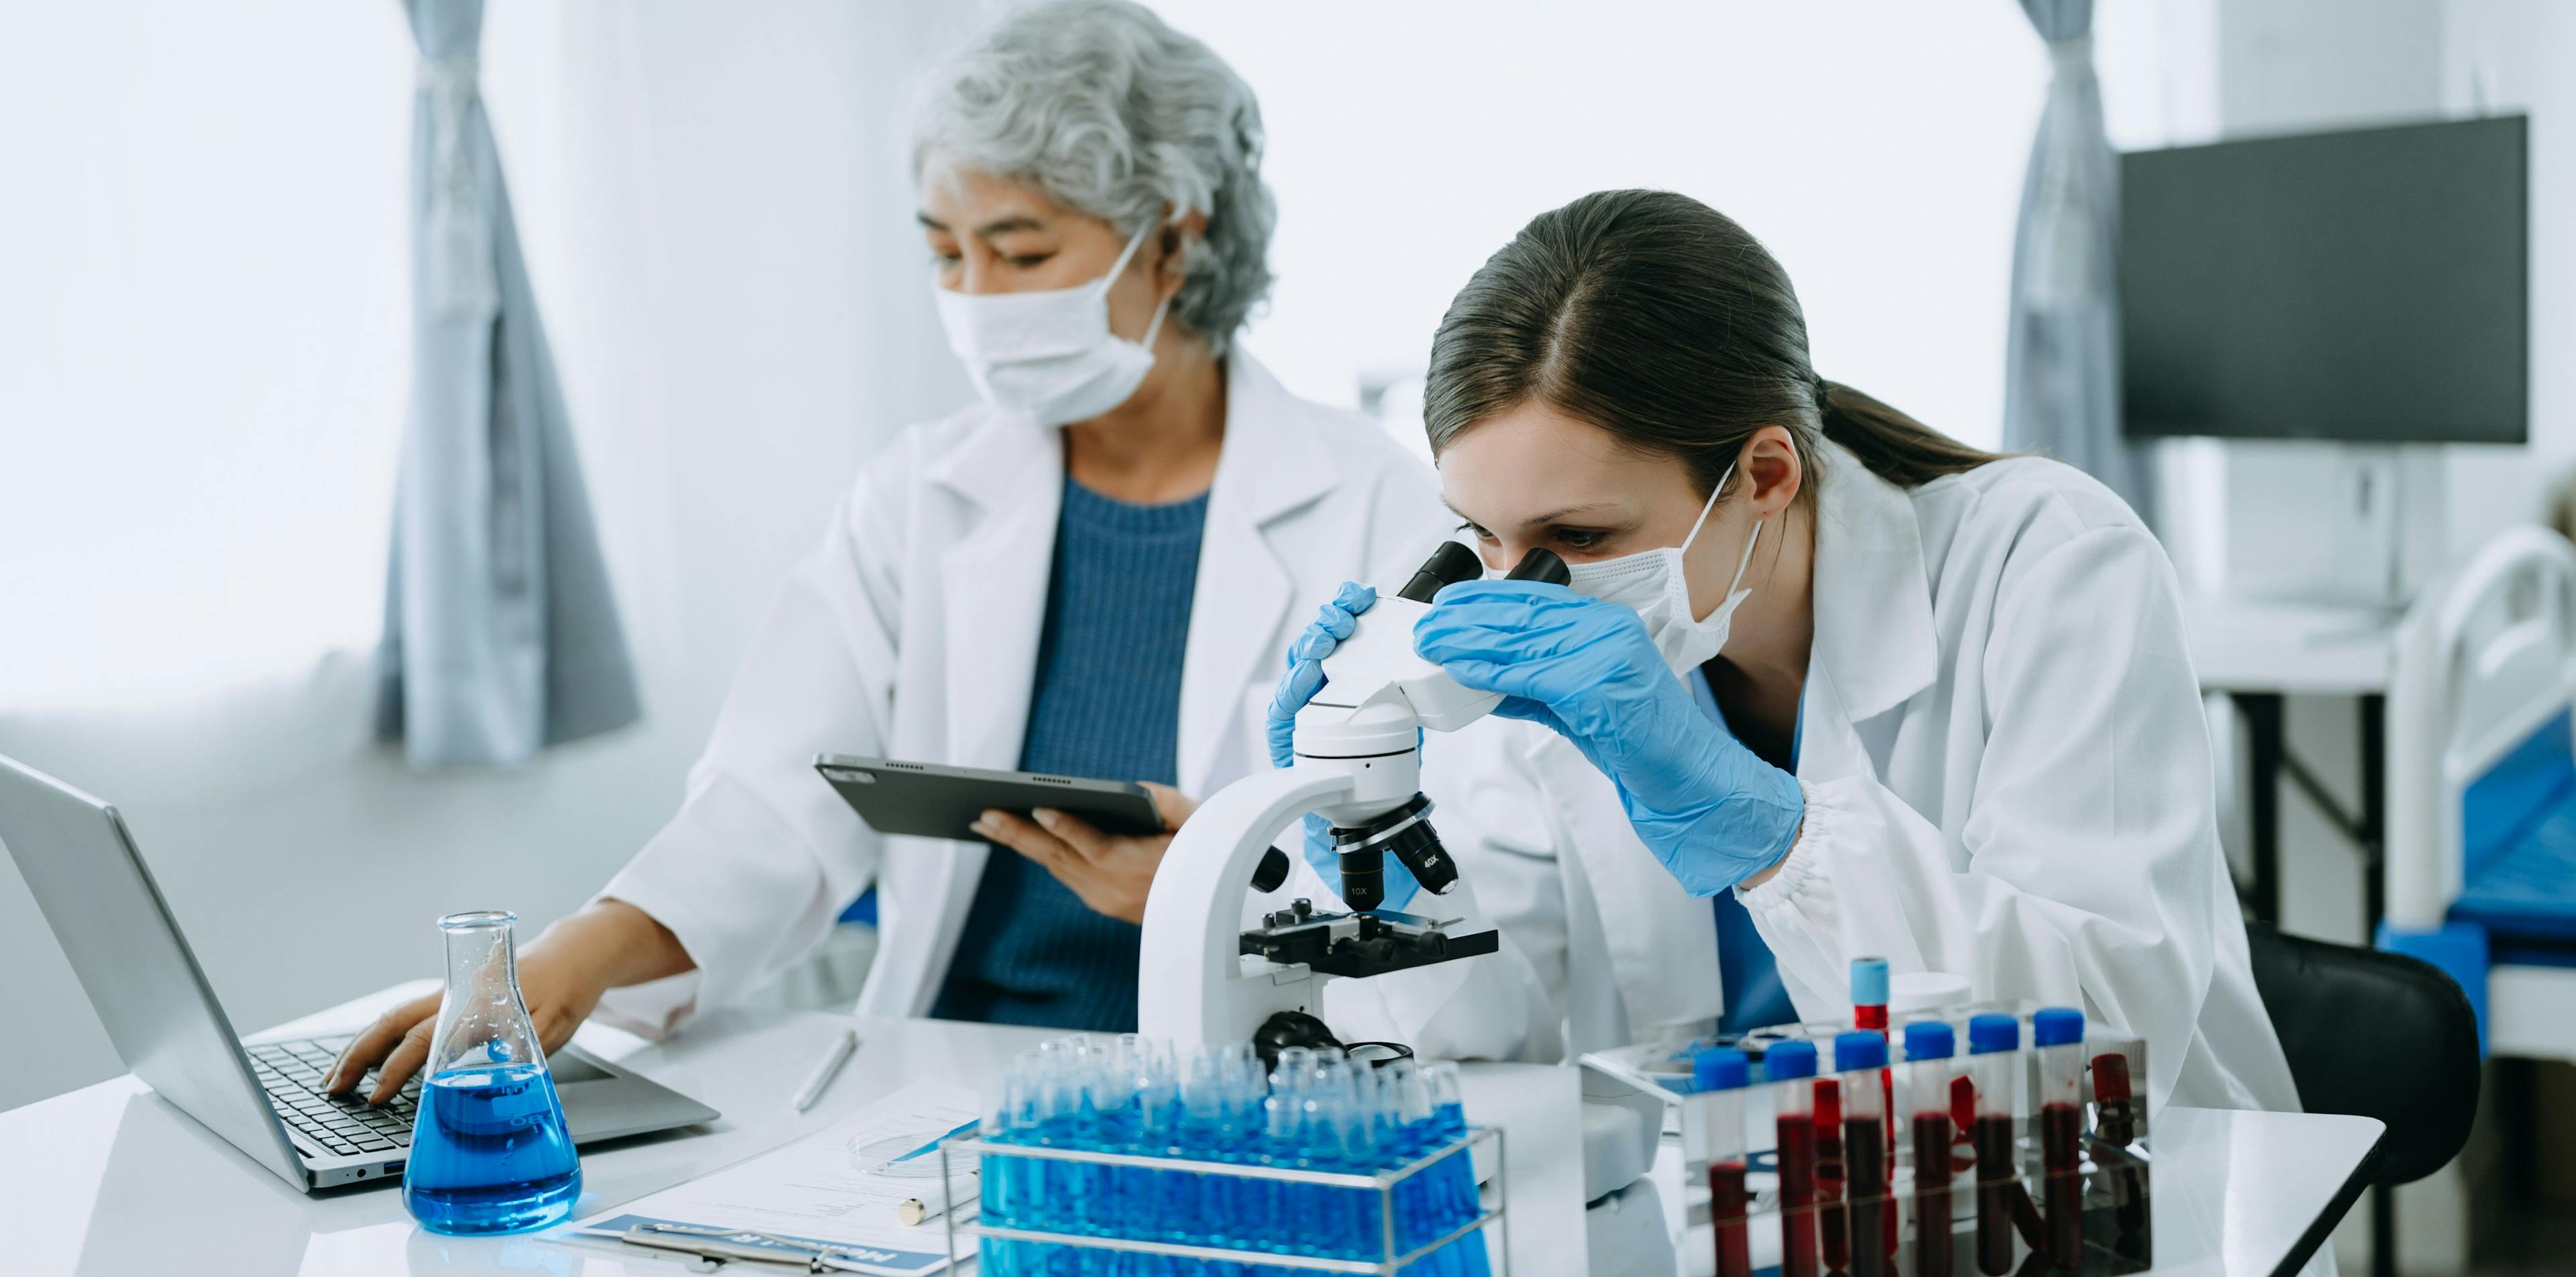 For statistical analyses, proportions of female-led research with accepted R01 grants were compared between 2012 and 2022, with a proportion analysis conducted among each NIH agency. Image Credit: © Nuttapong punna - stock.adobe.com